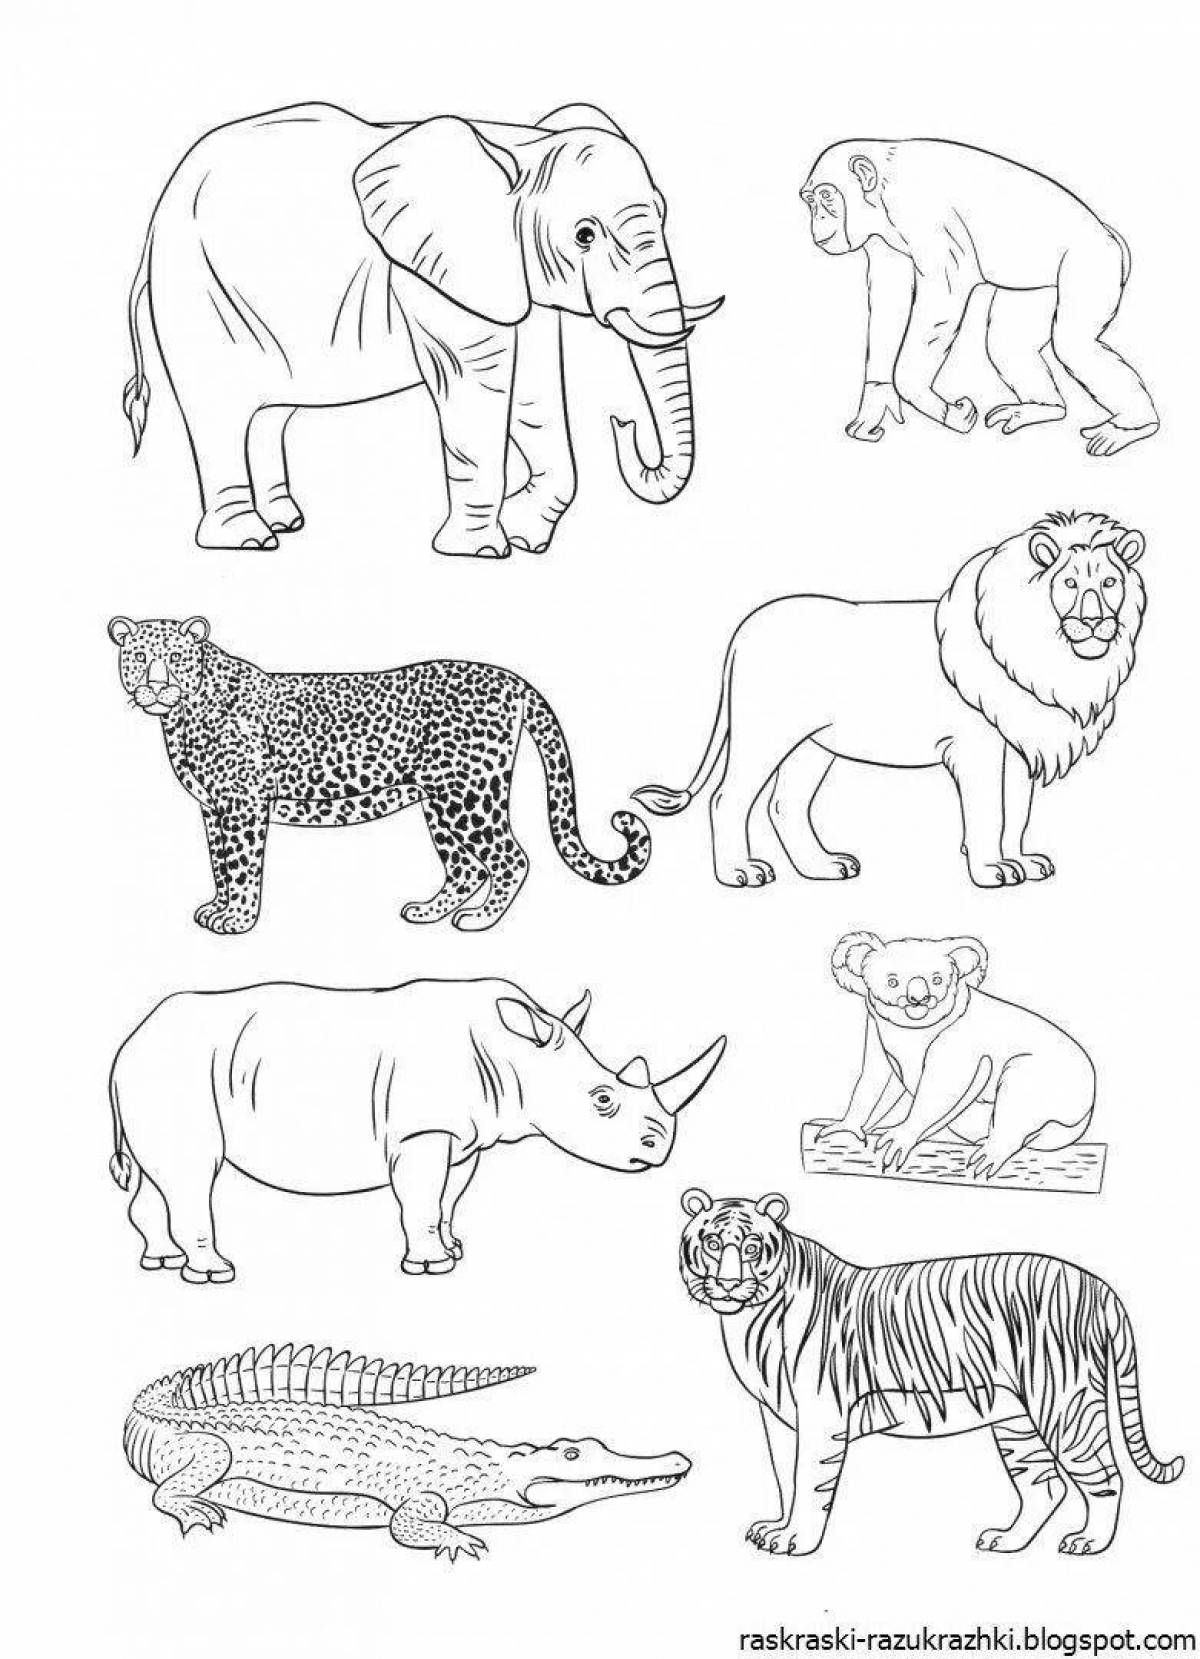 Complex coloring for children with animals from hot countries